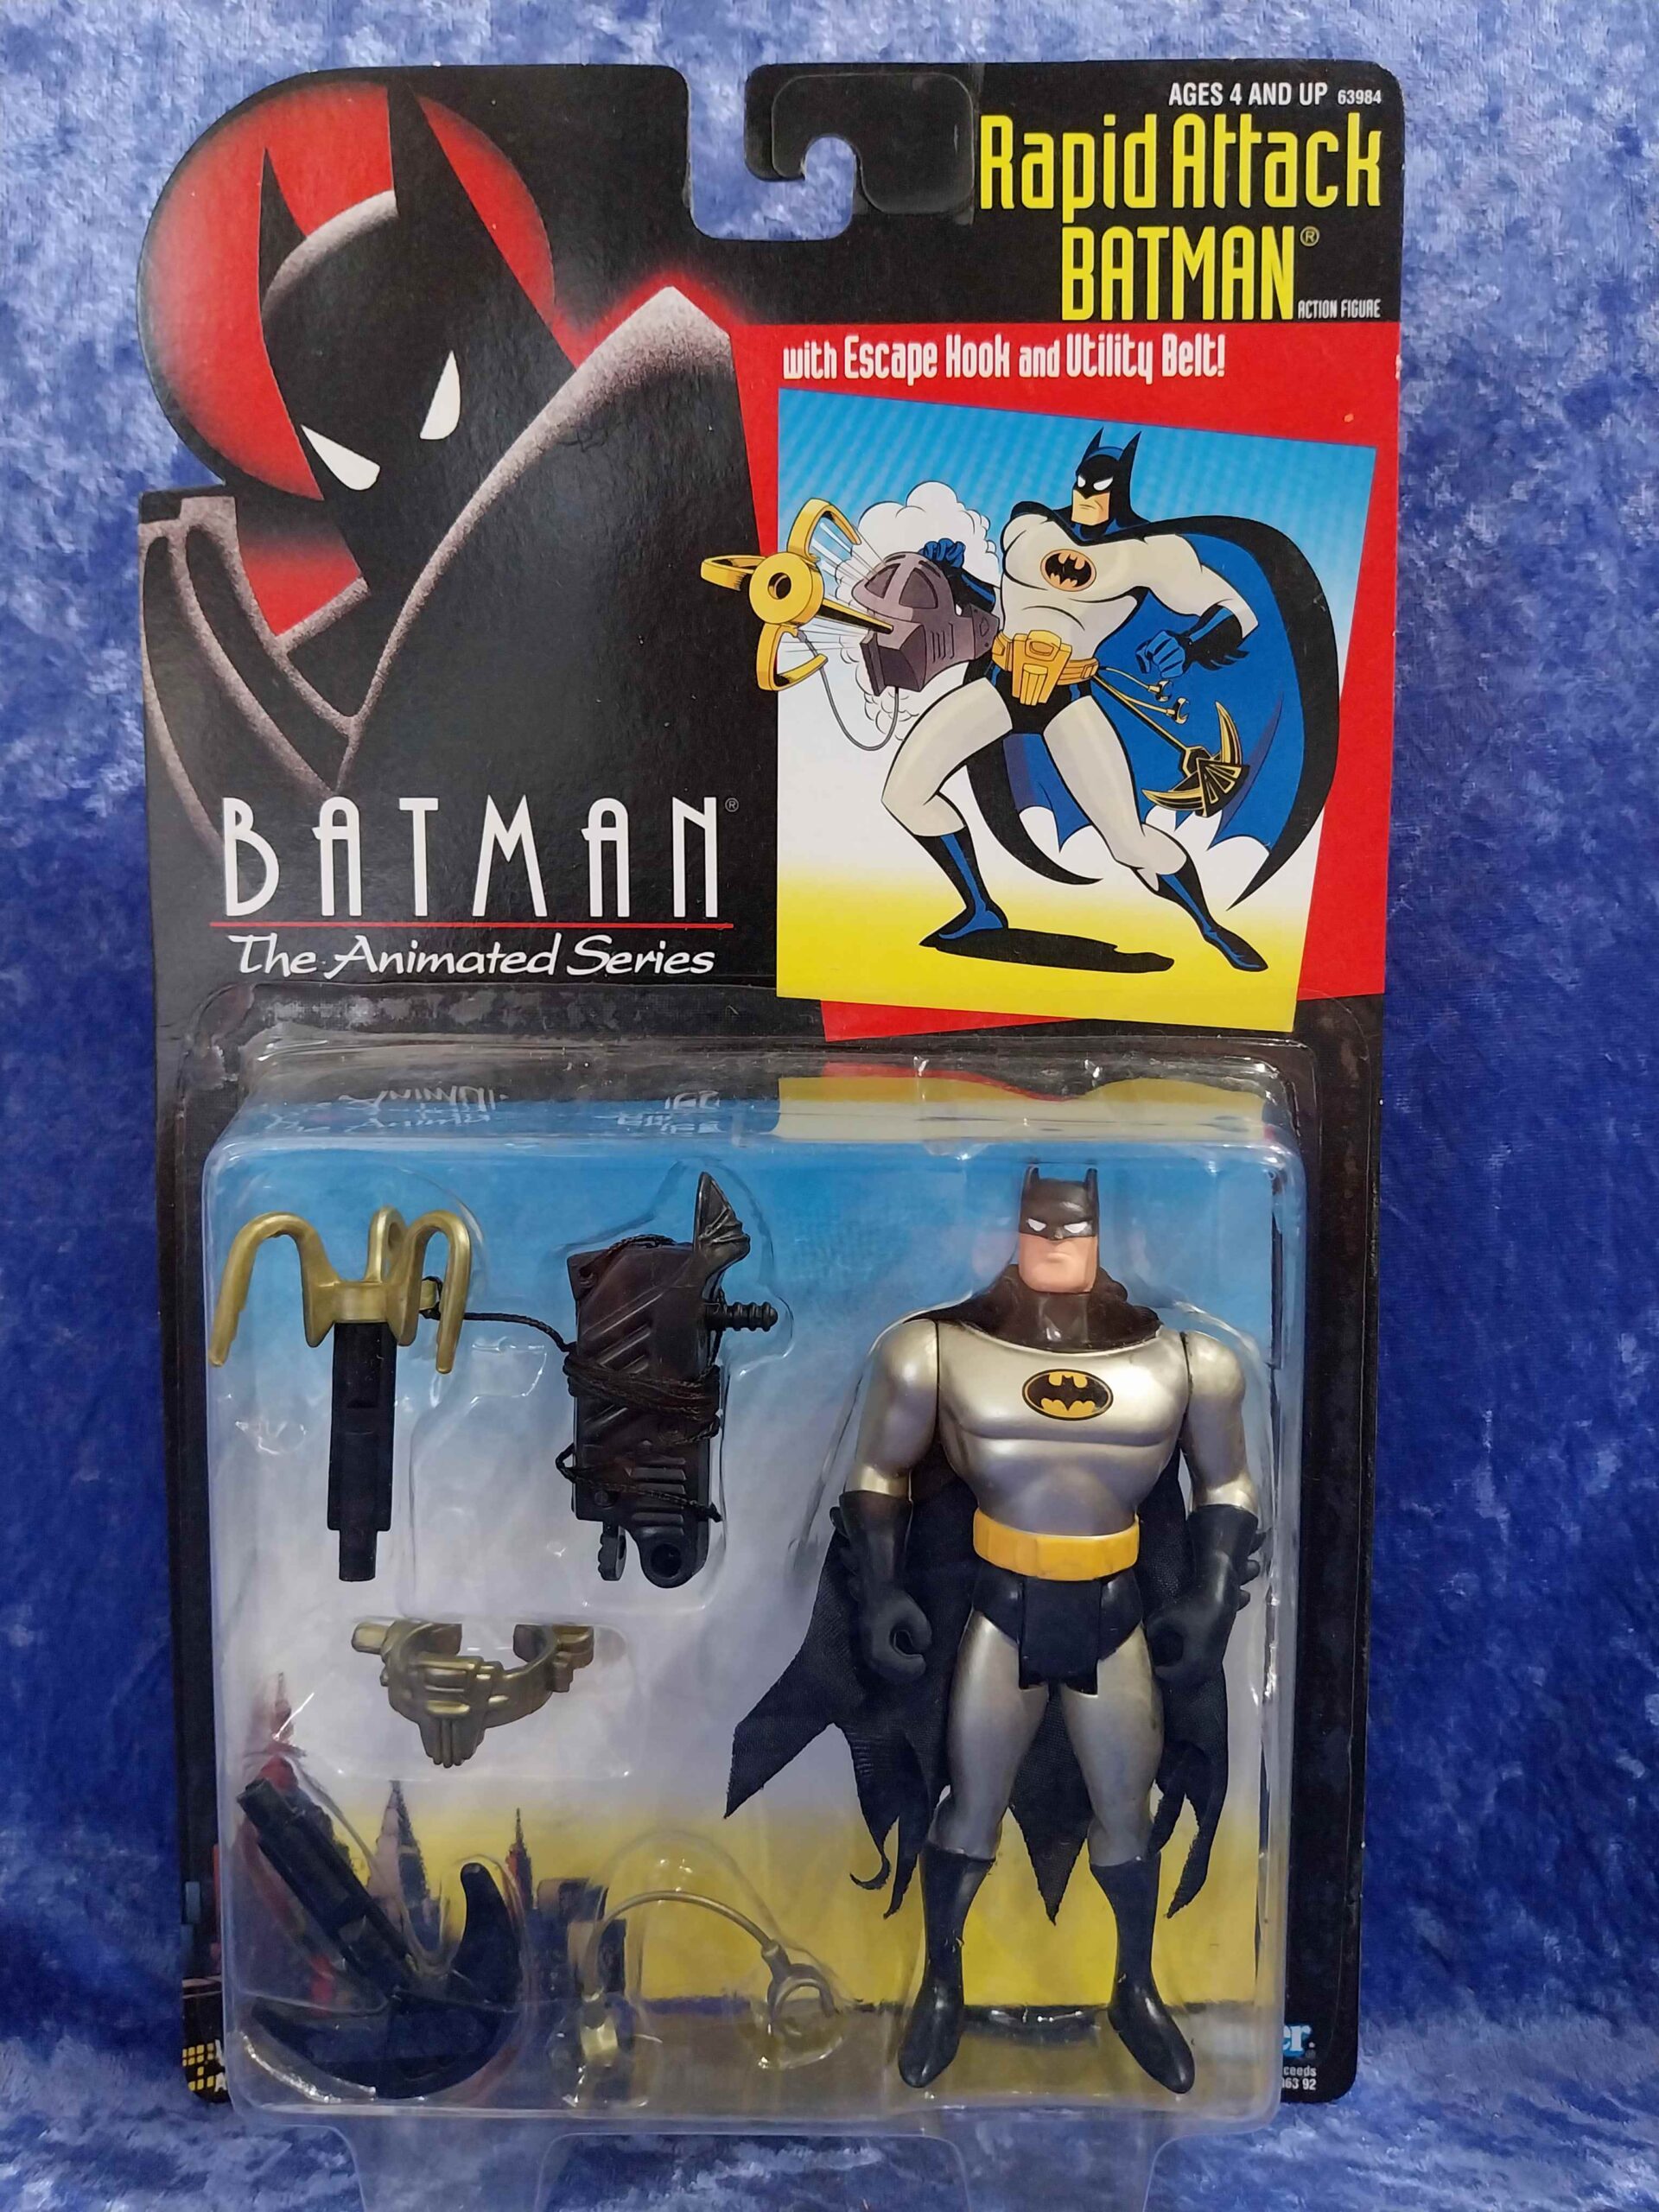 BATMAN - The Animated Series by KENNER Rapid Attack BATMAN action ...